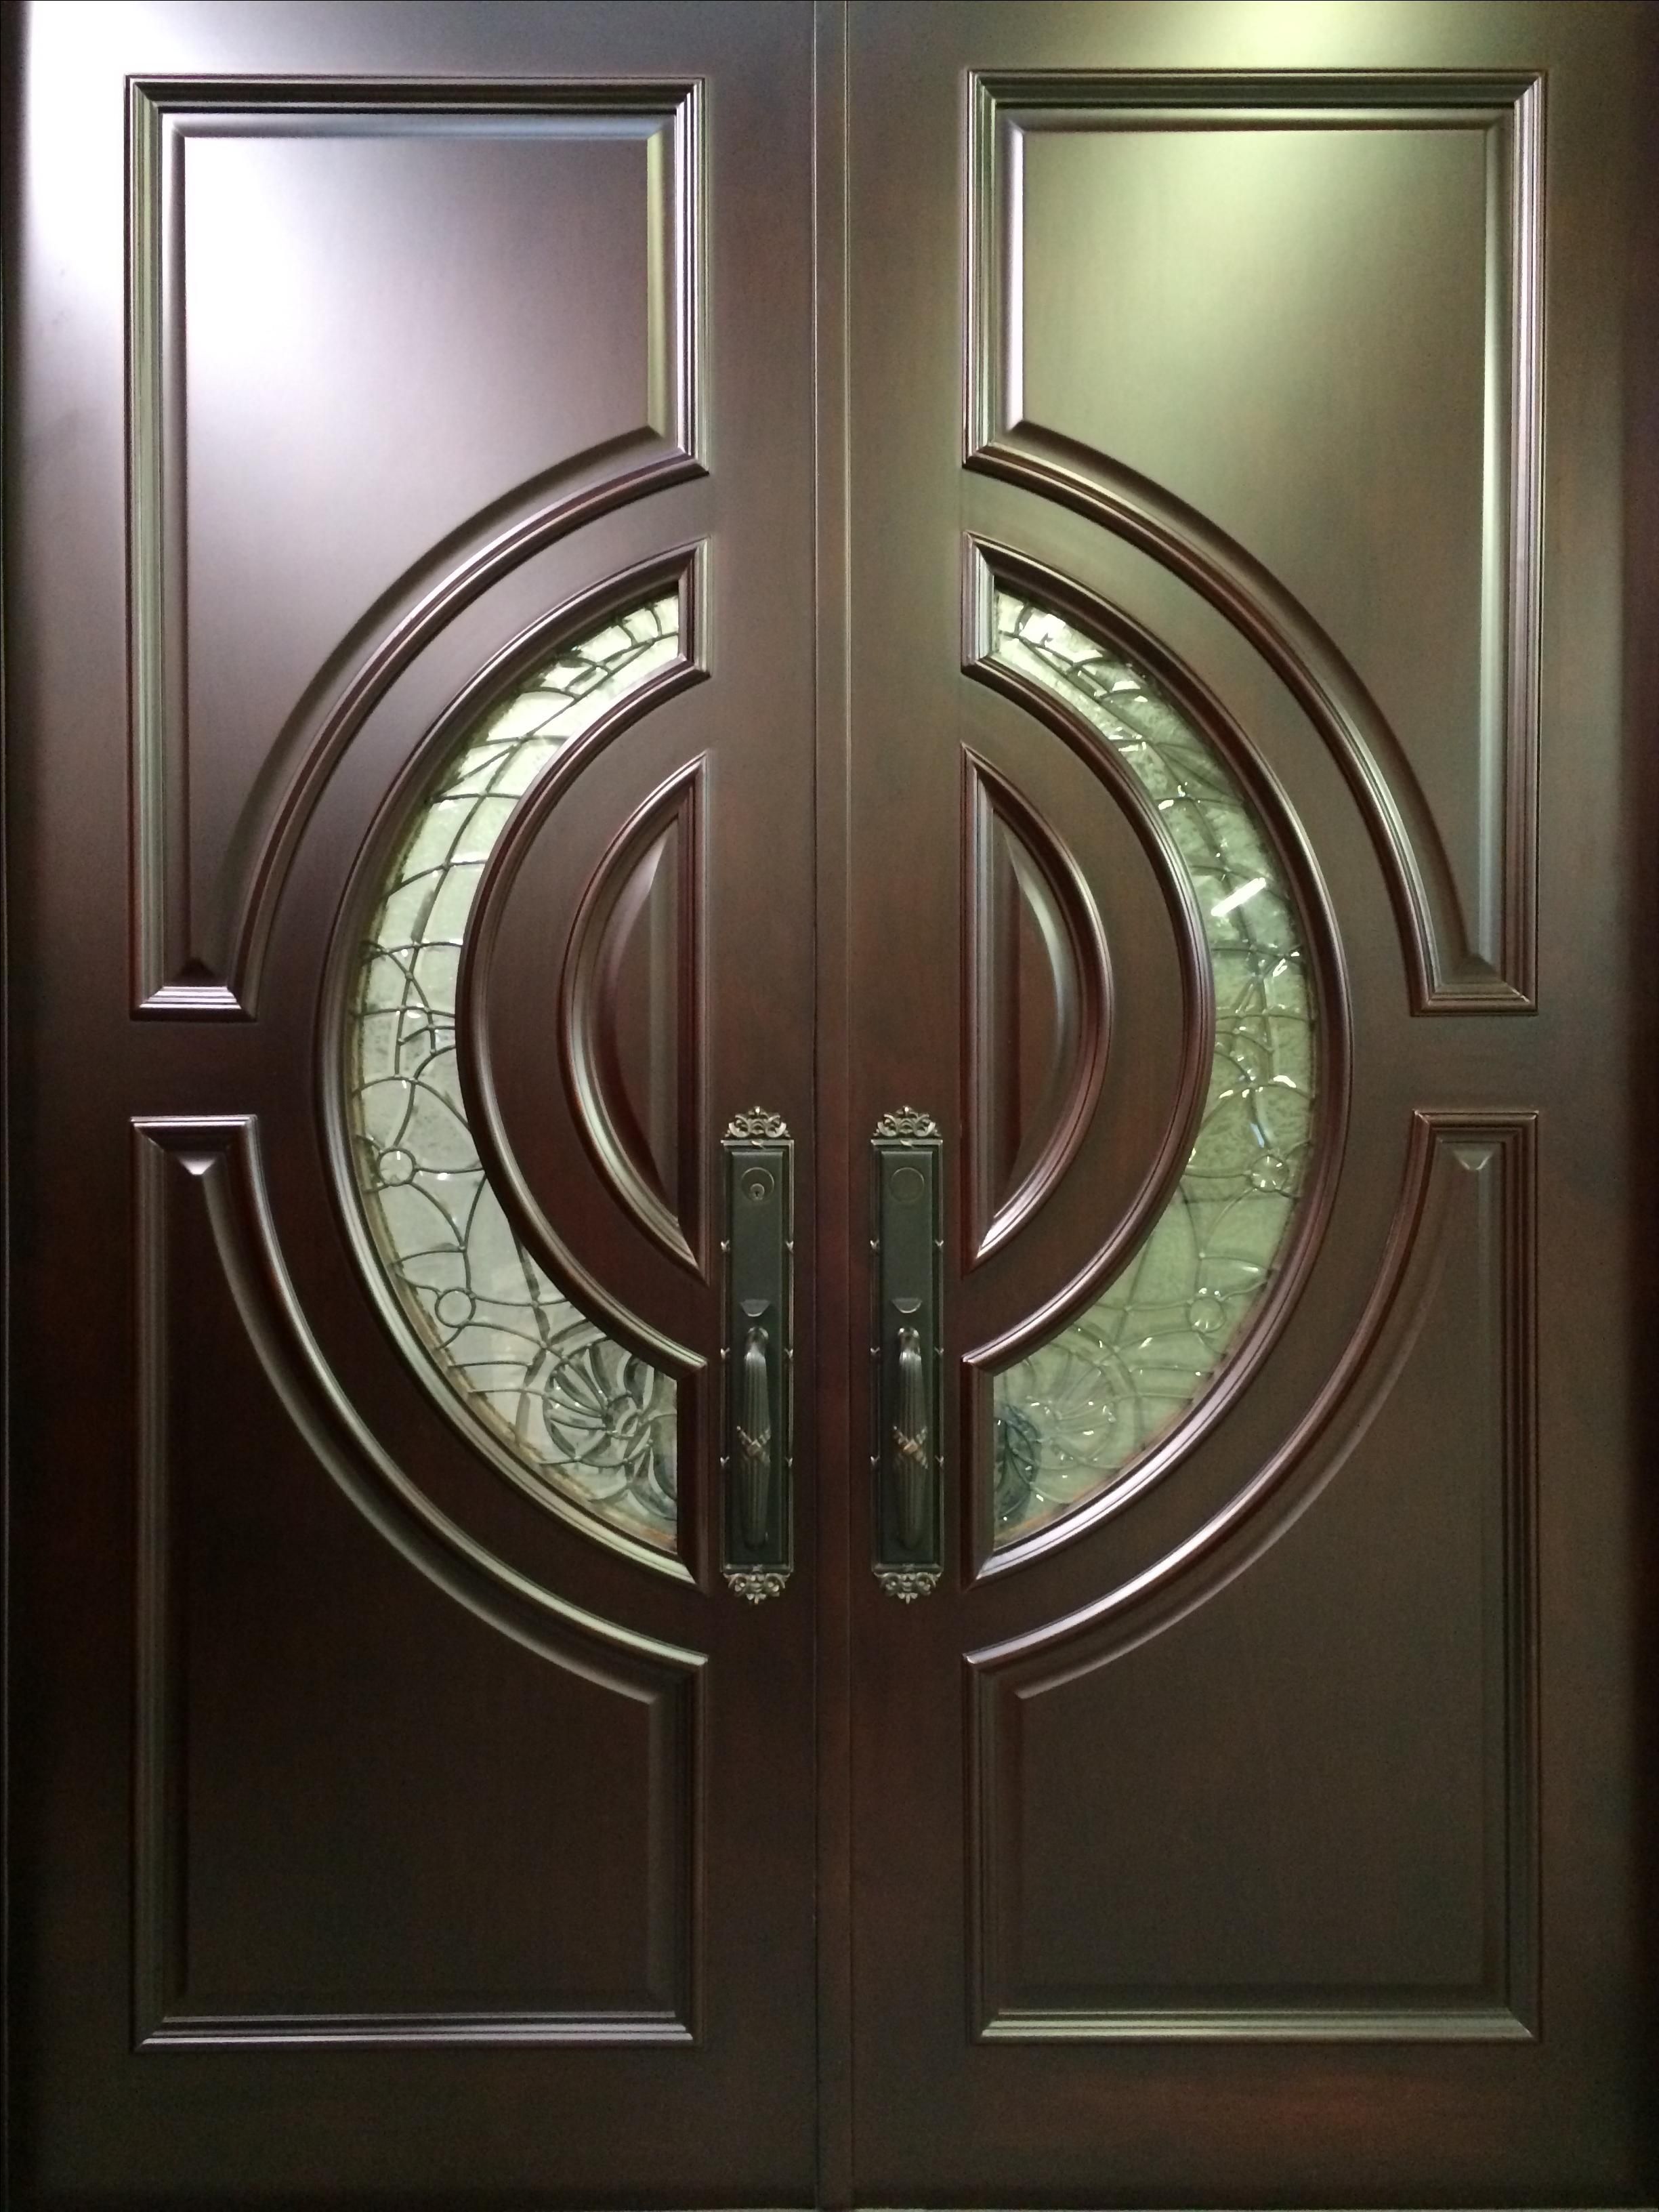 Buy a Custom Made Residential Mahogany Front Entry Door, made to order